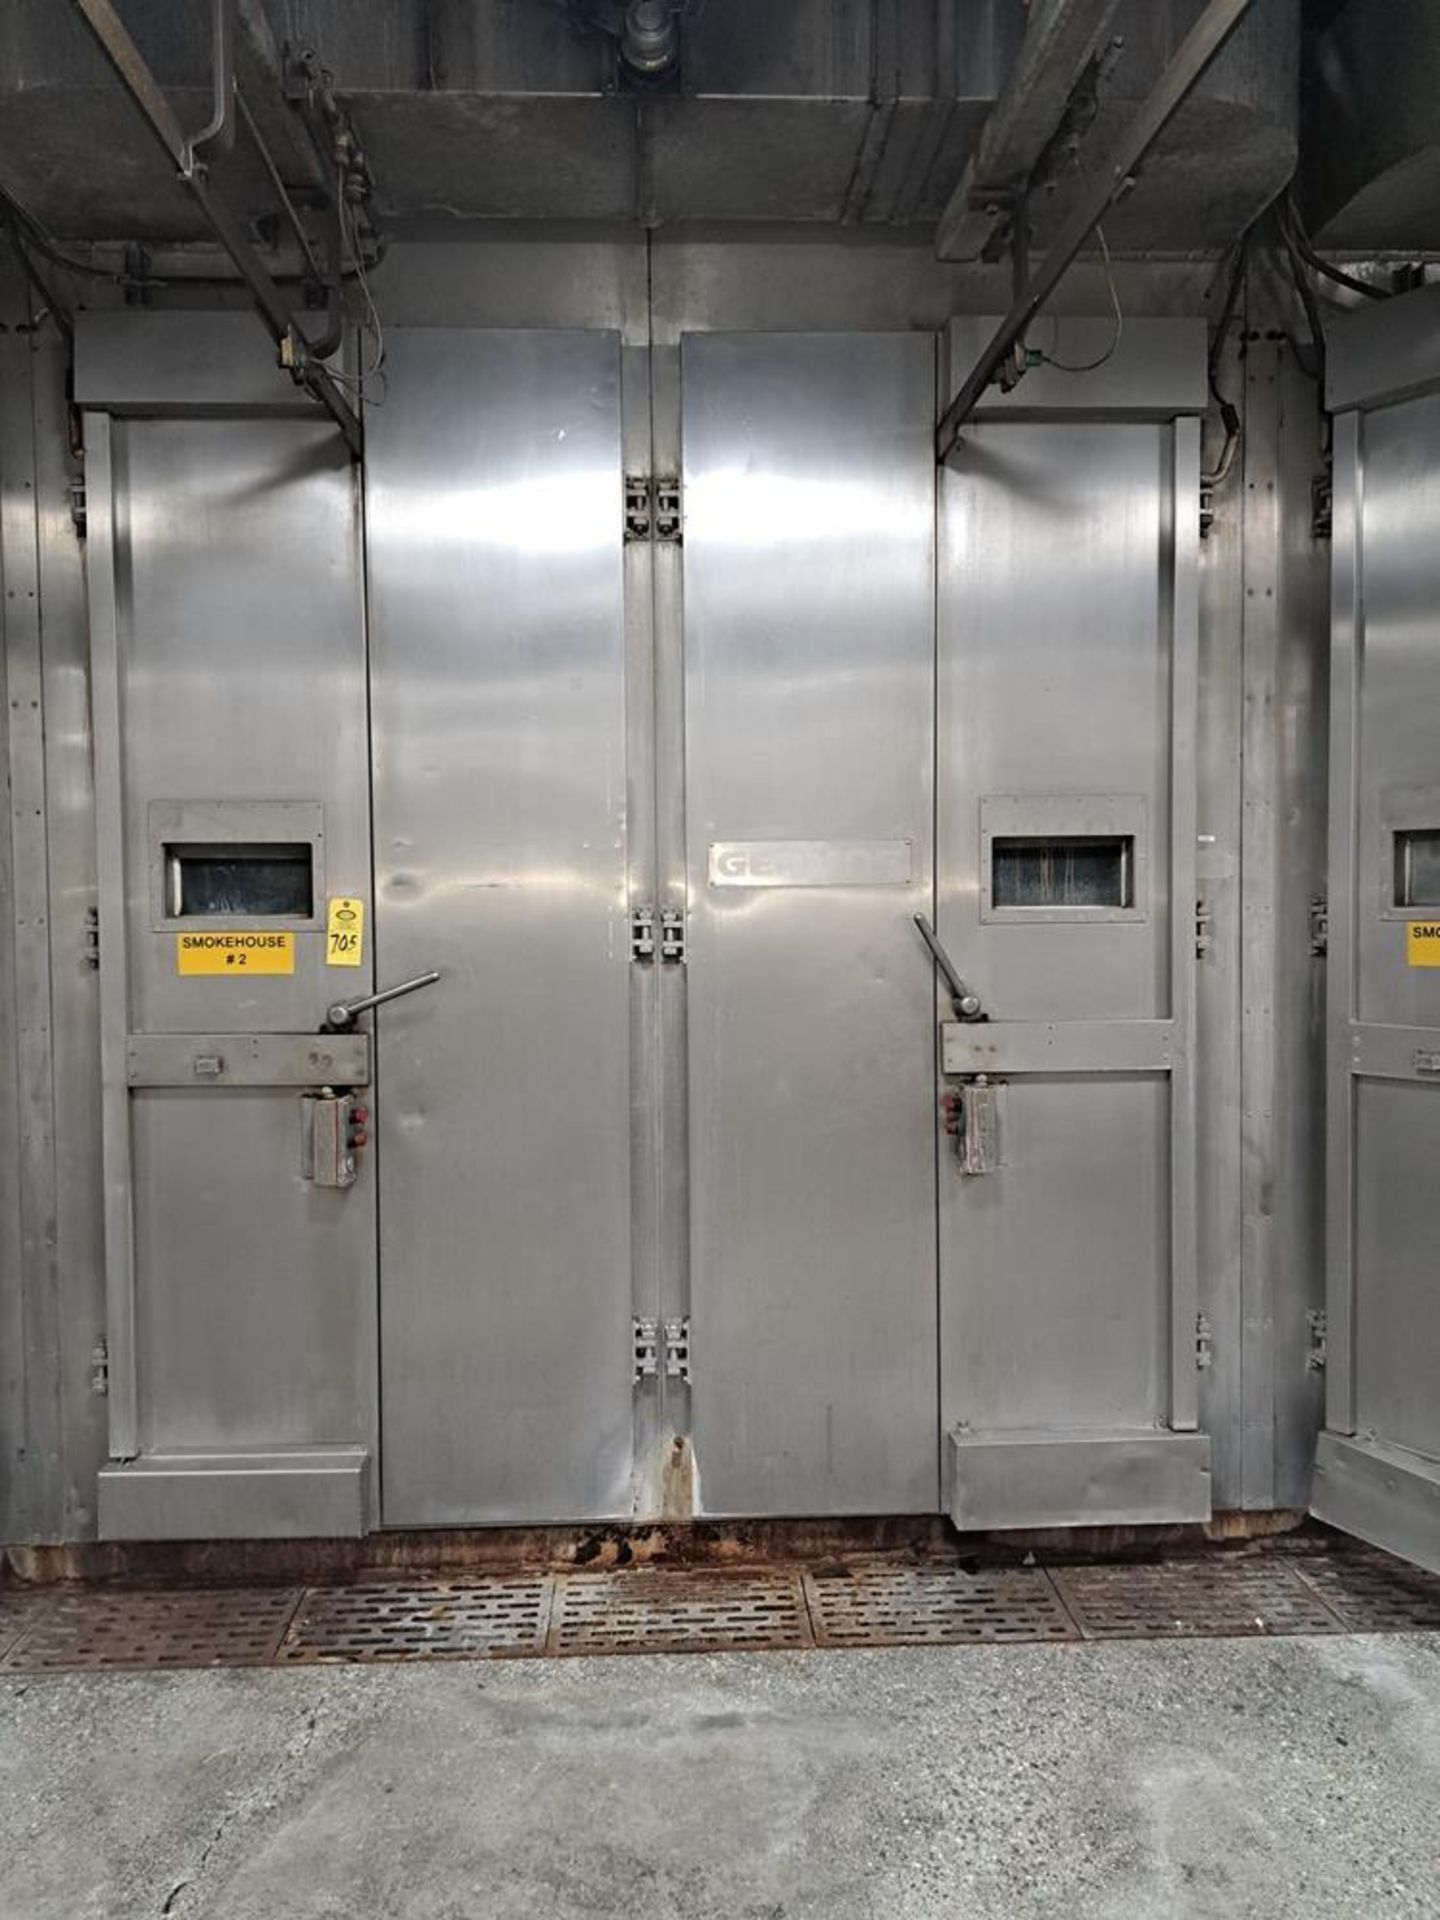 Germos Stainless Steel Smokehouse with rail, double door pass trough, middle barrier, cook/chiller - Image 11 of 12